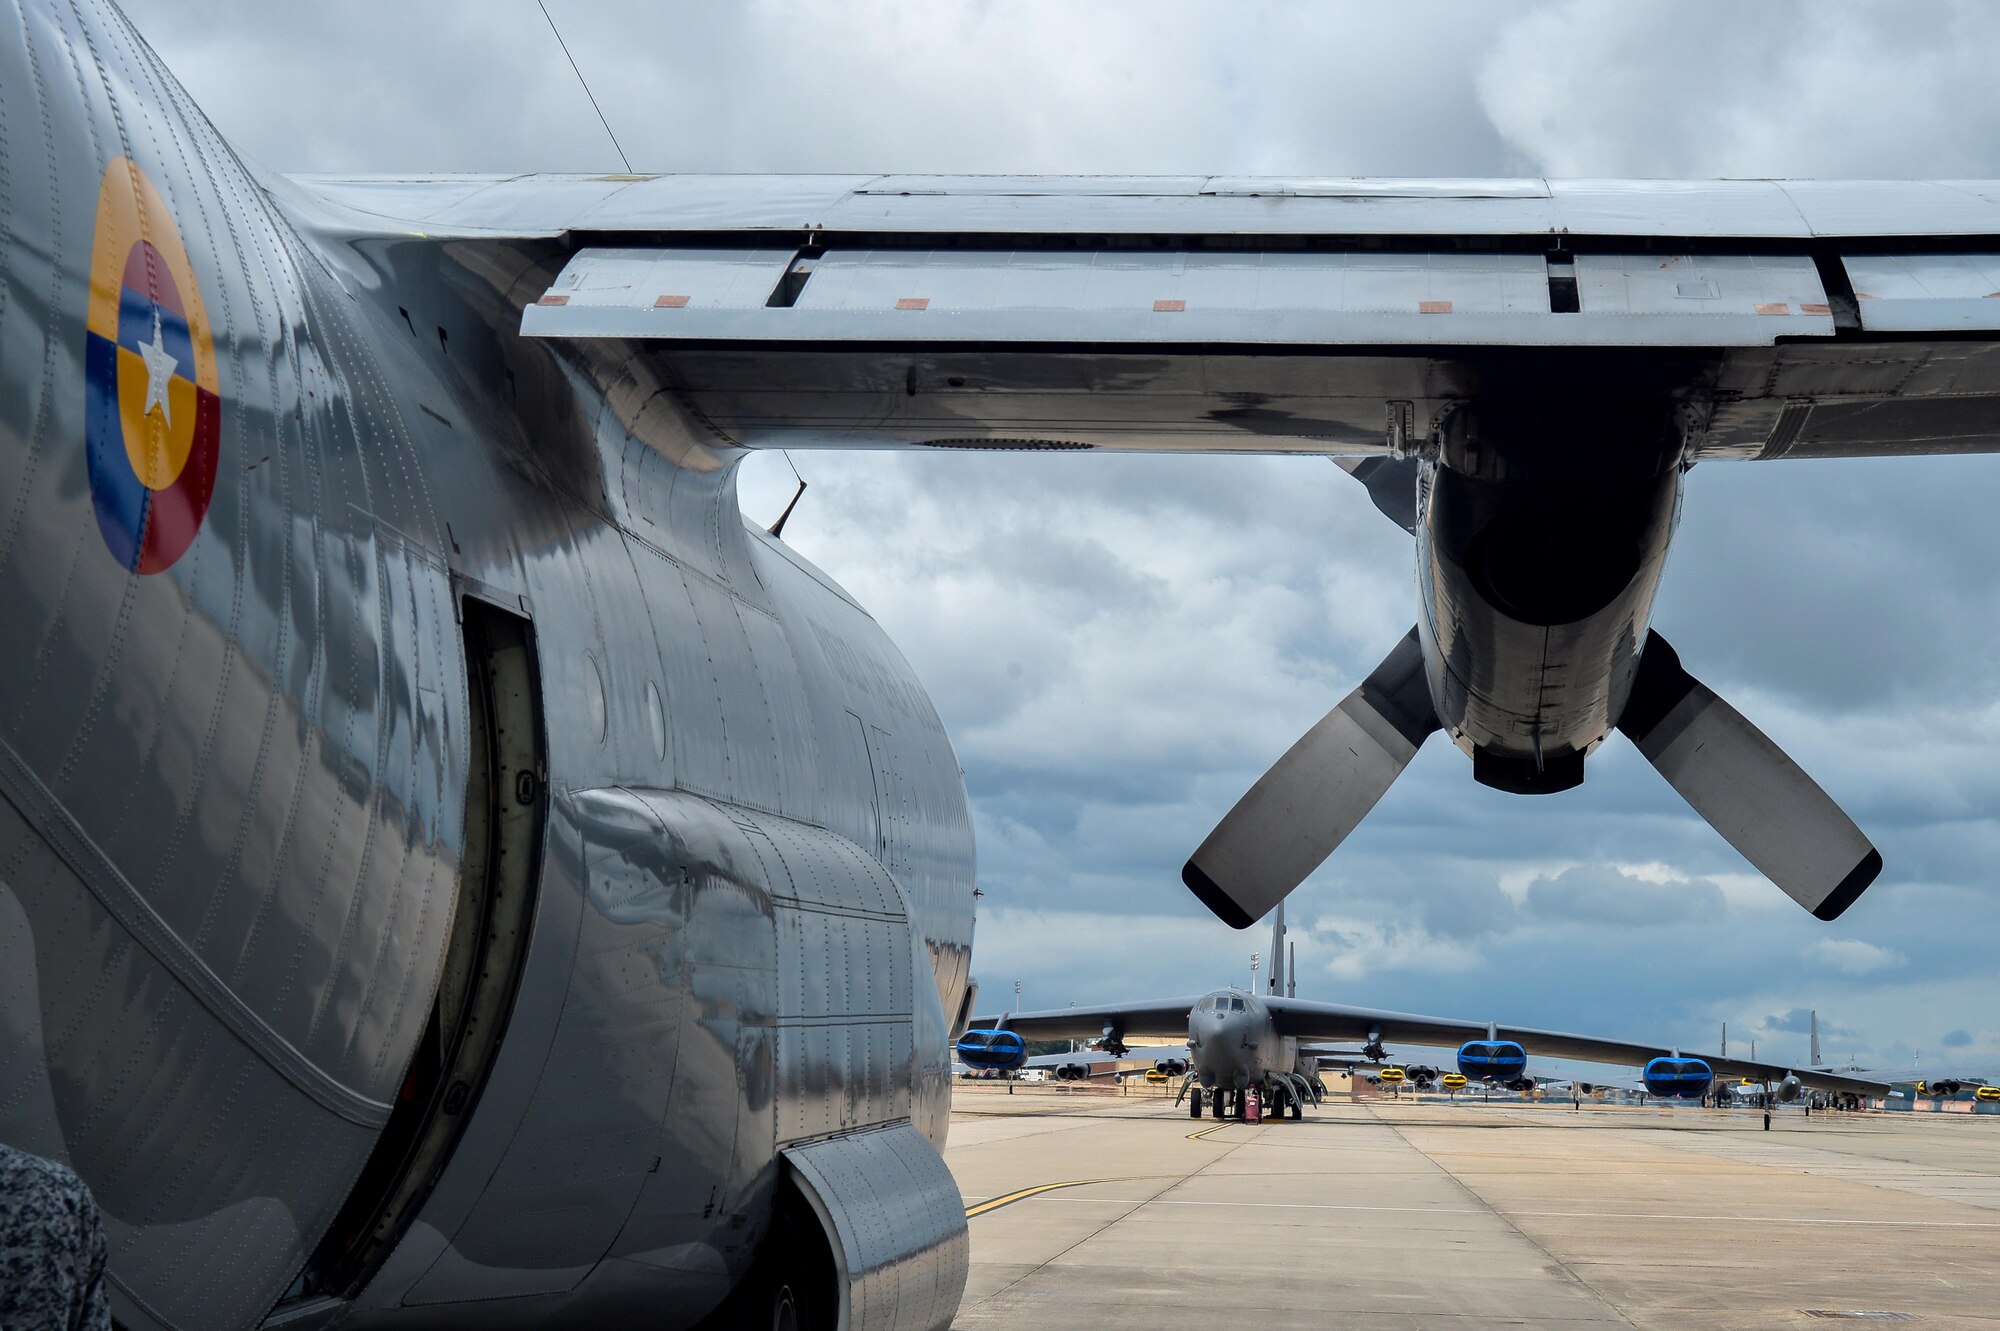 A Colombian Air Force C-130 Hercules sits on the ramp after offloading personnel and cargo at Barksdale Air Force Base, La., Aug. 13, 2016. The Colombians arrived to Barksdale to participate in Exercise Green Flag East. (U.S. Air Force photo/Senior Airman Mozer O. Da Cunha)